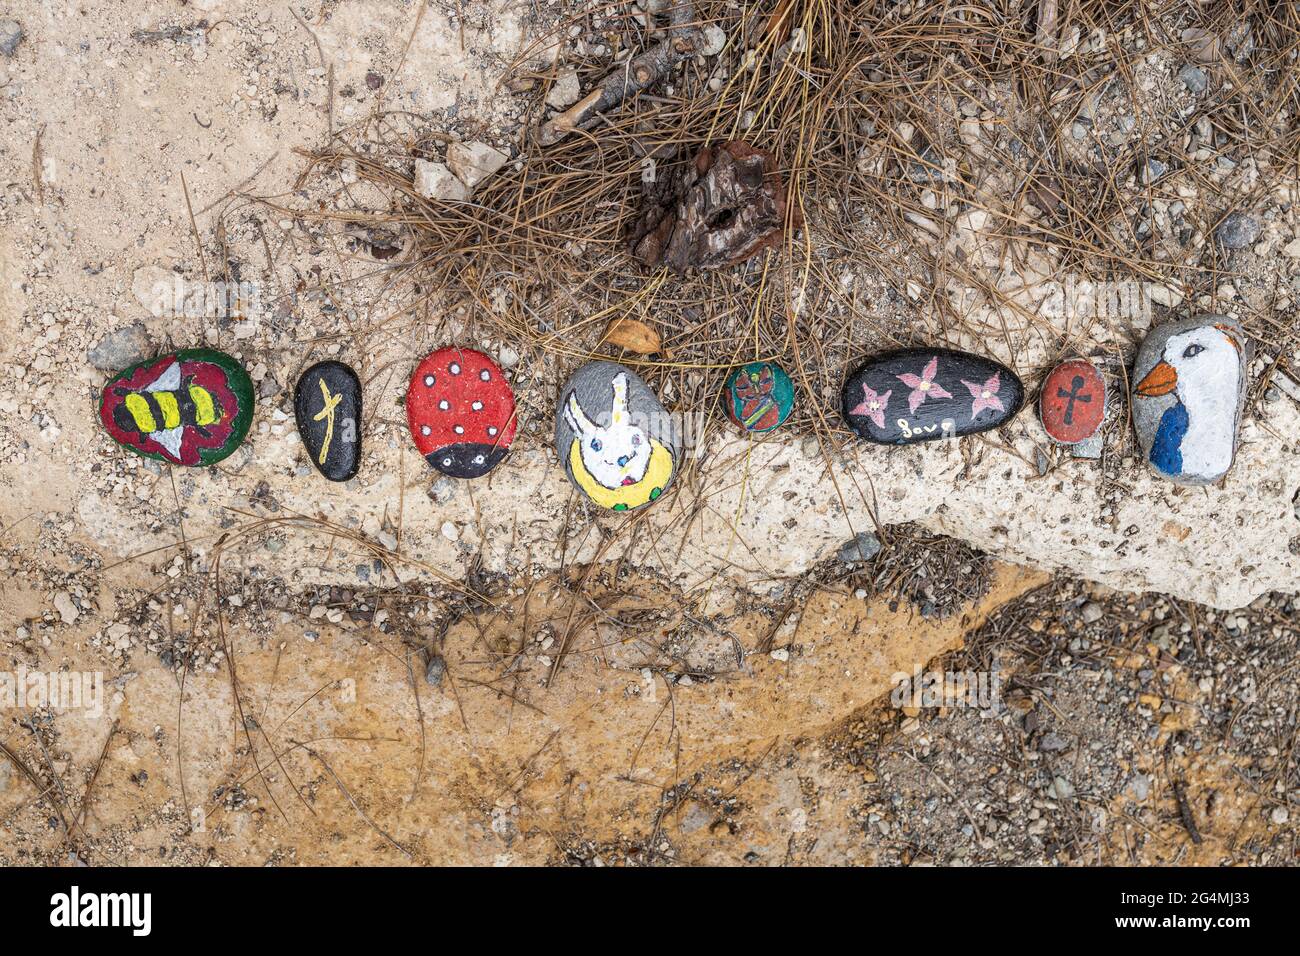 Painted stones left by the path through the forest at Ifonche, Barranco de Infierno, Adeje, Tenerife, Canary Islands, Spain Stock Photo